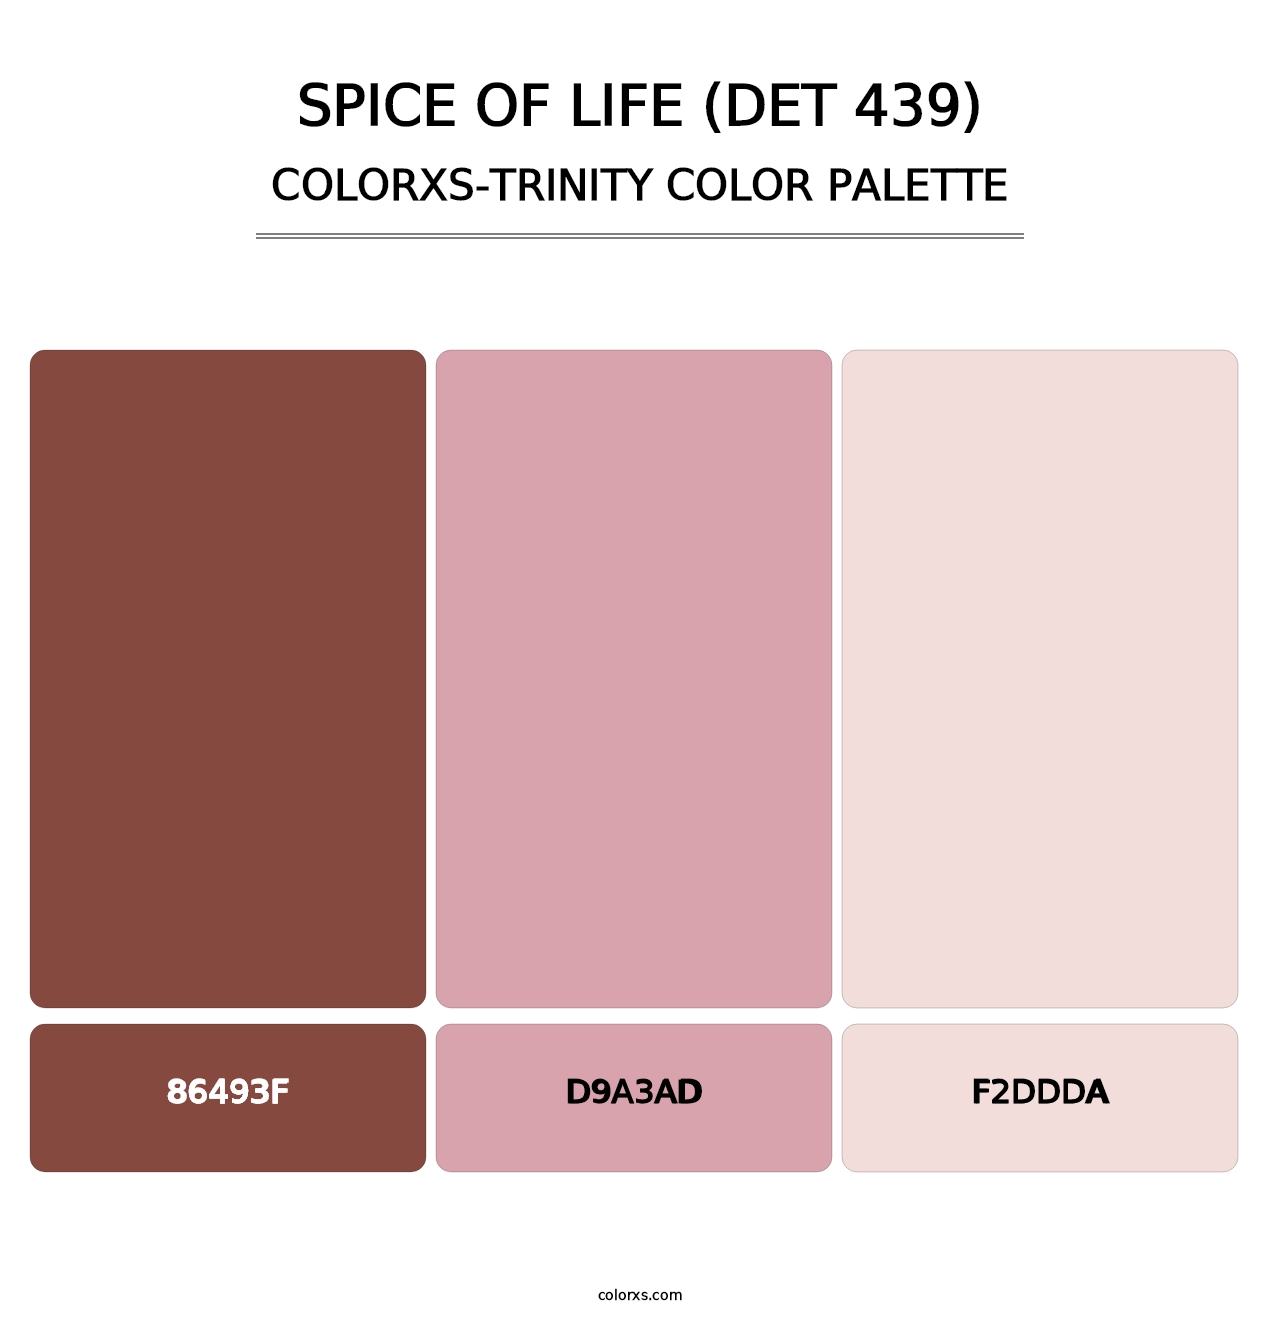 Spice of Life (DET 439) - Colorxs Trinity Palette